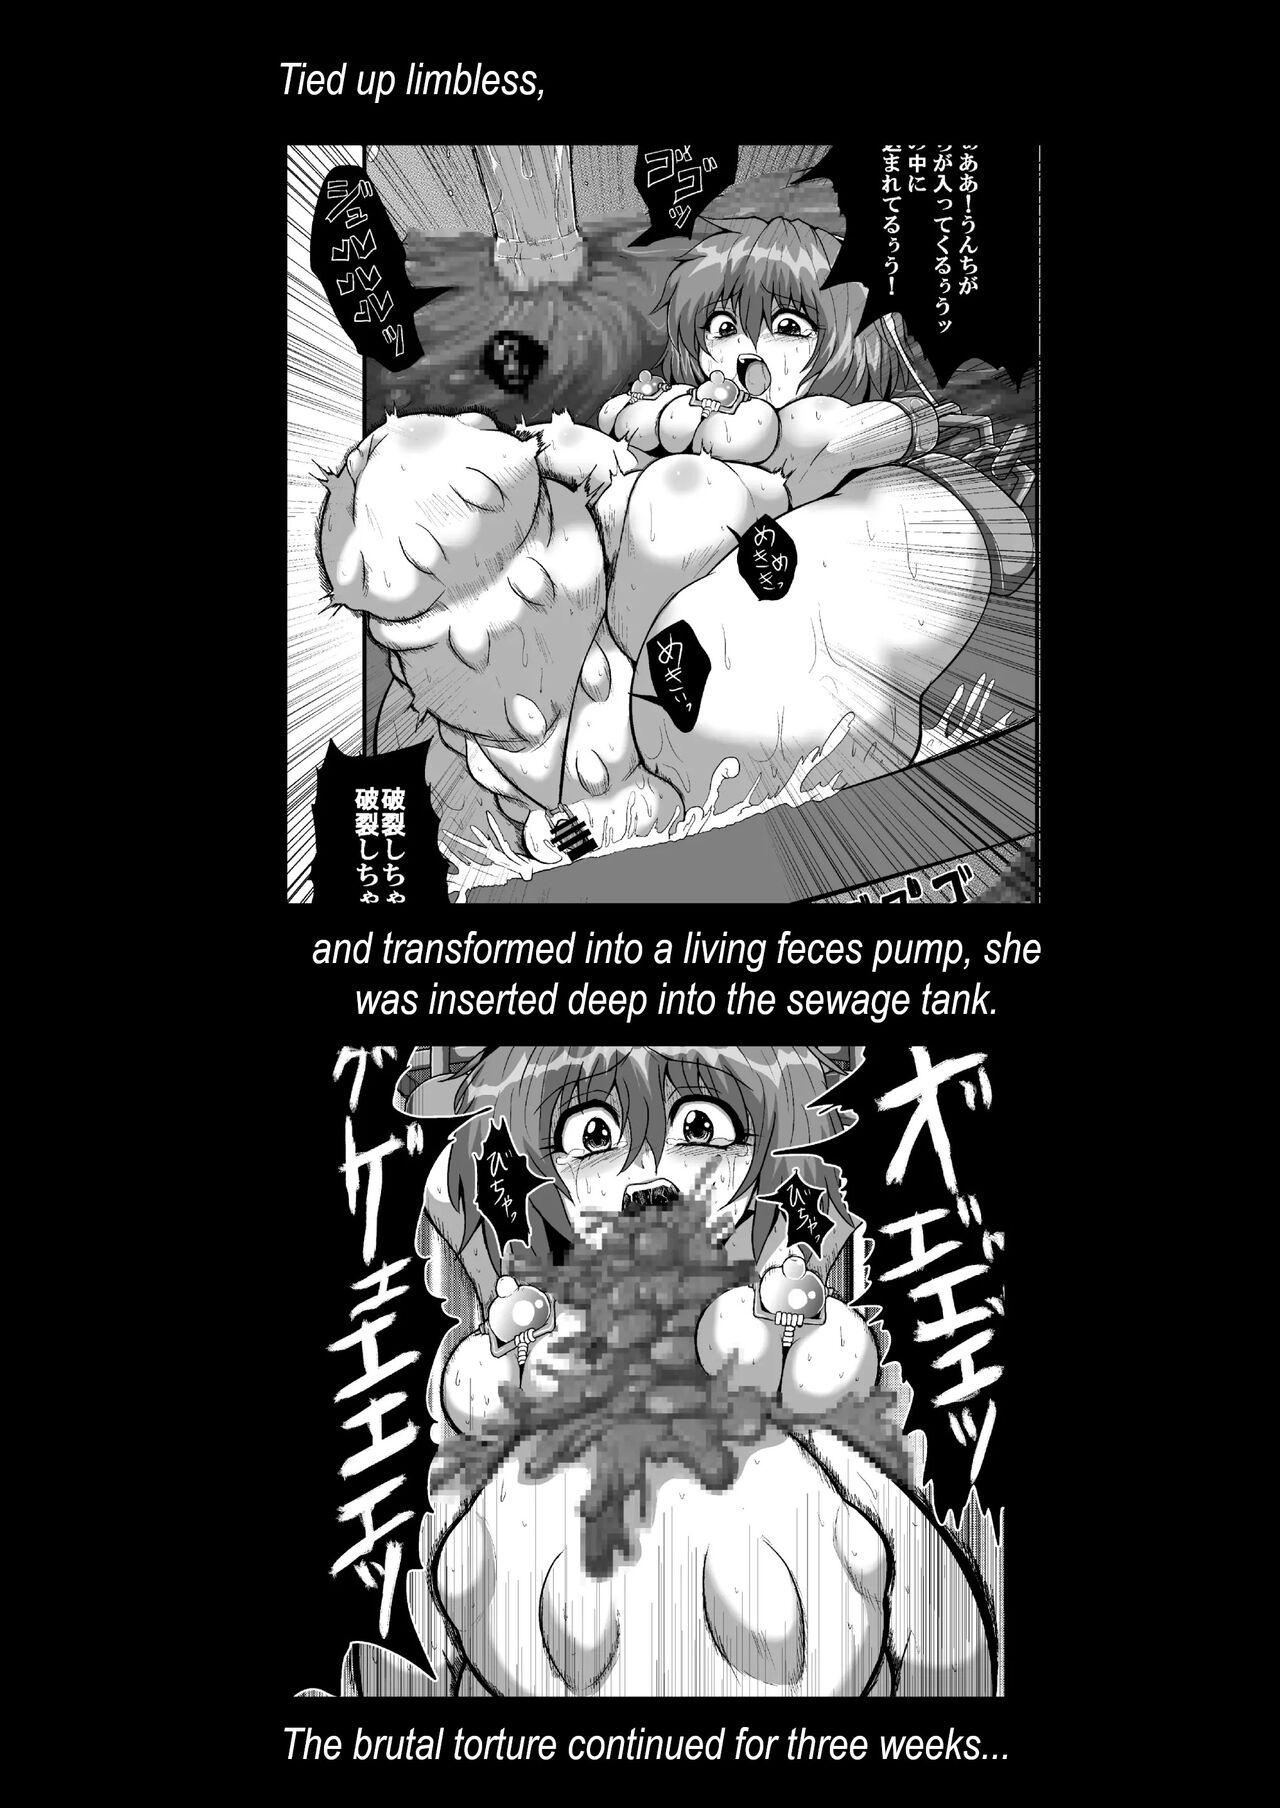 Club [Zuru] Marisa's thrill - Take care of yourself - 通り魔理沙にきをつけろ - Part 6 - Touhou project Livecams - Page 6